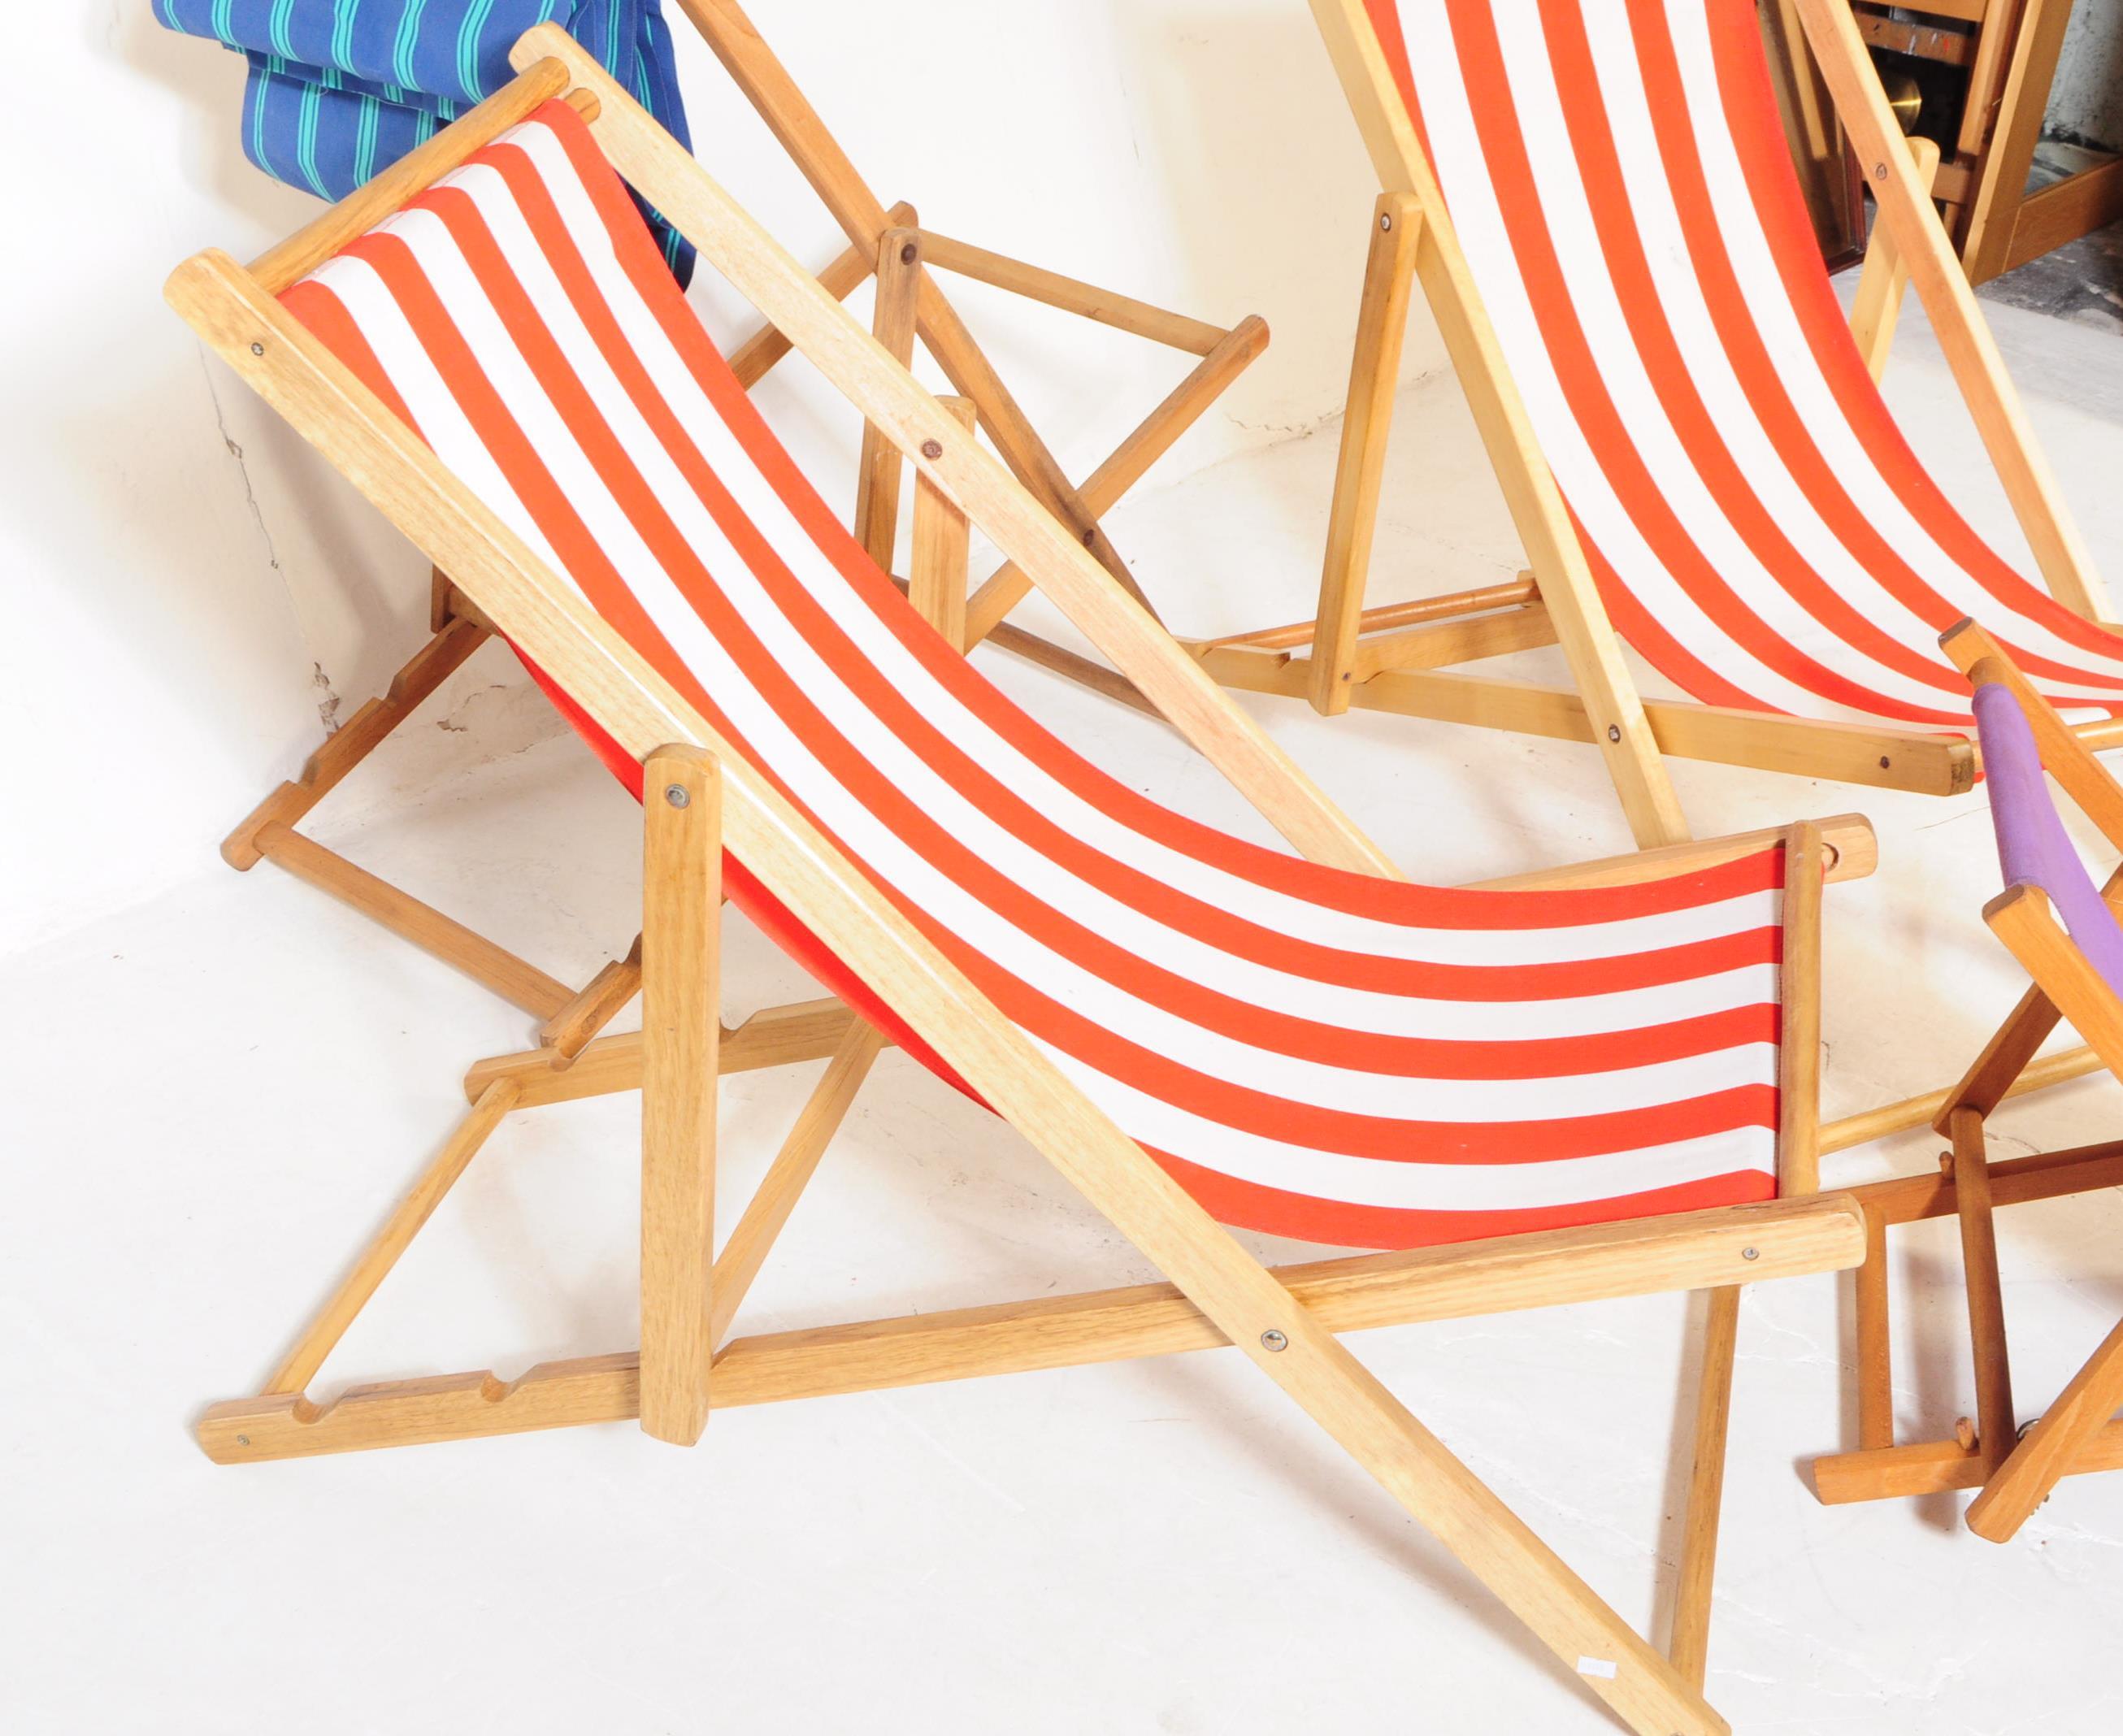 FOUR BEECH WOOD BEACH DECK CHAIRS - Image 2 of 8